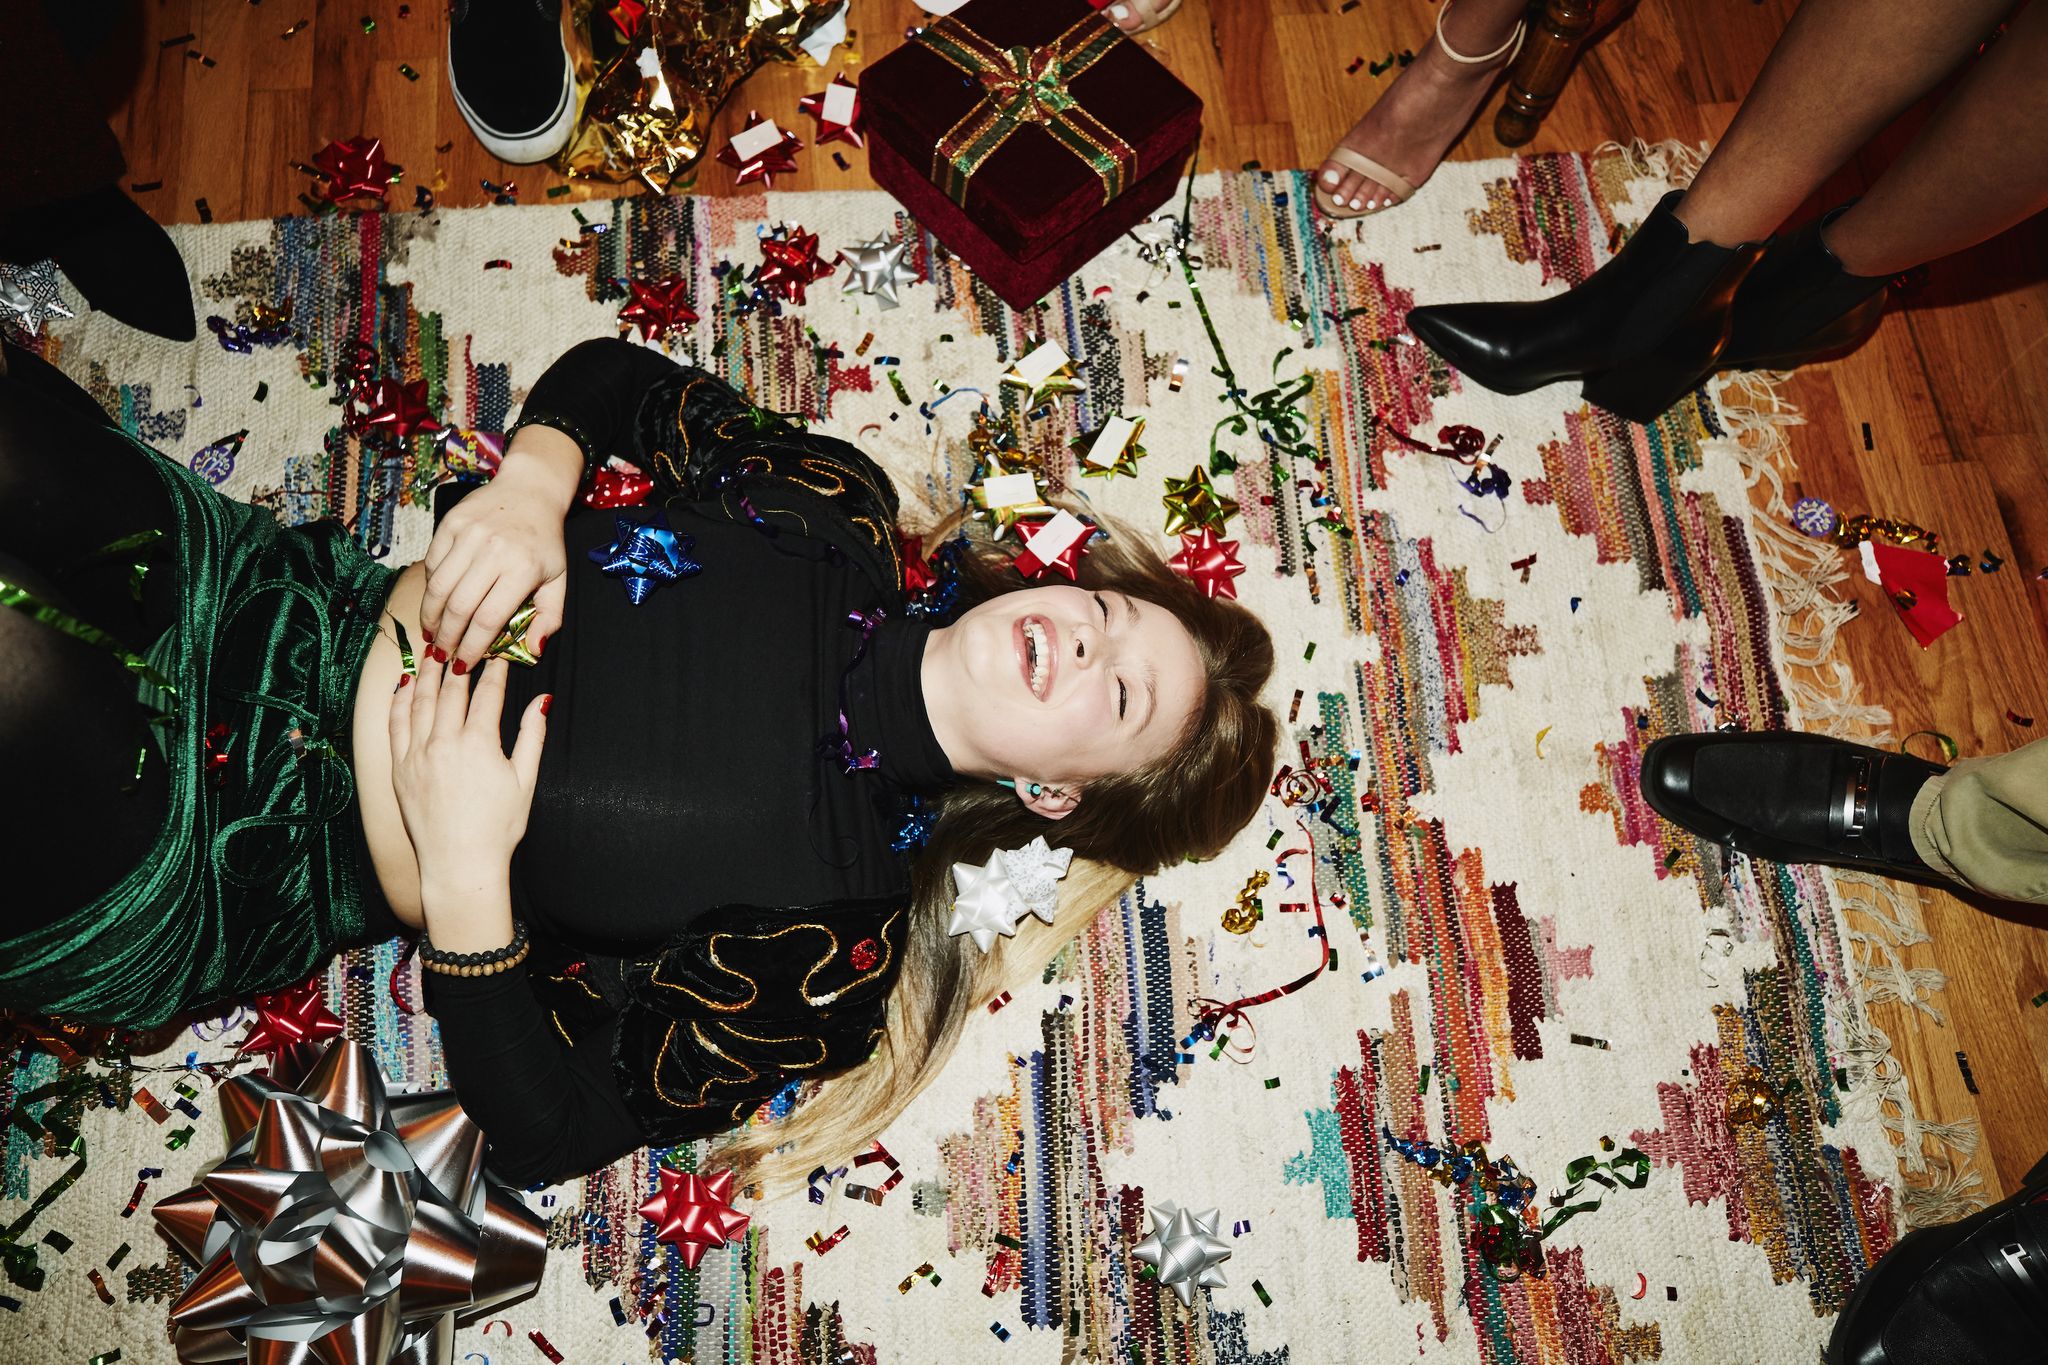 Laughing woman lying on floor covered in bows and confetti during holiday party with friends